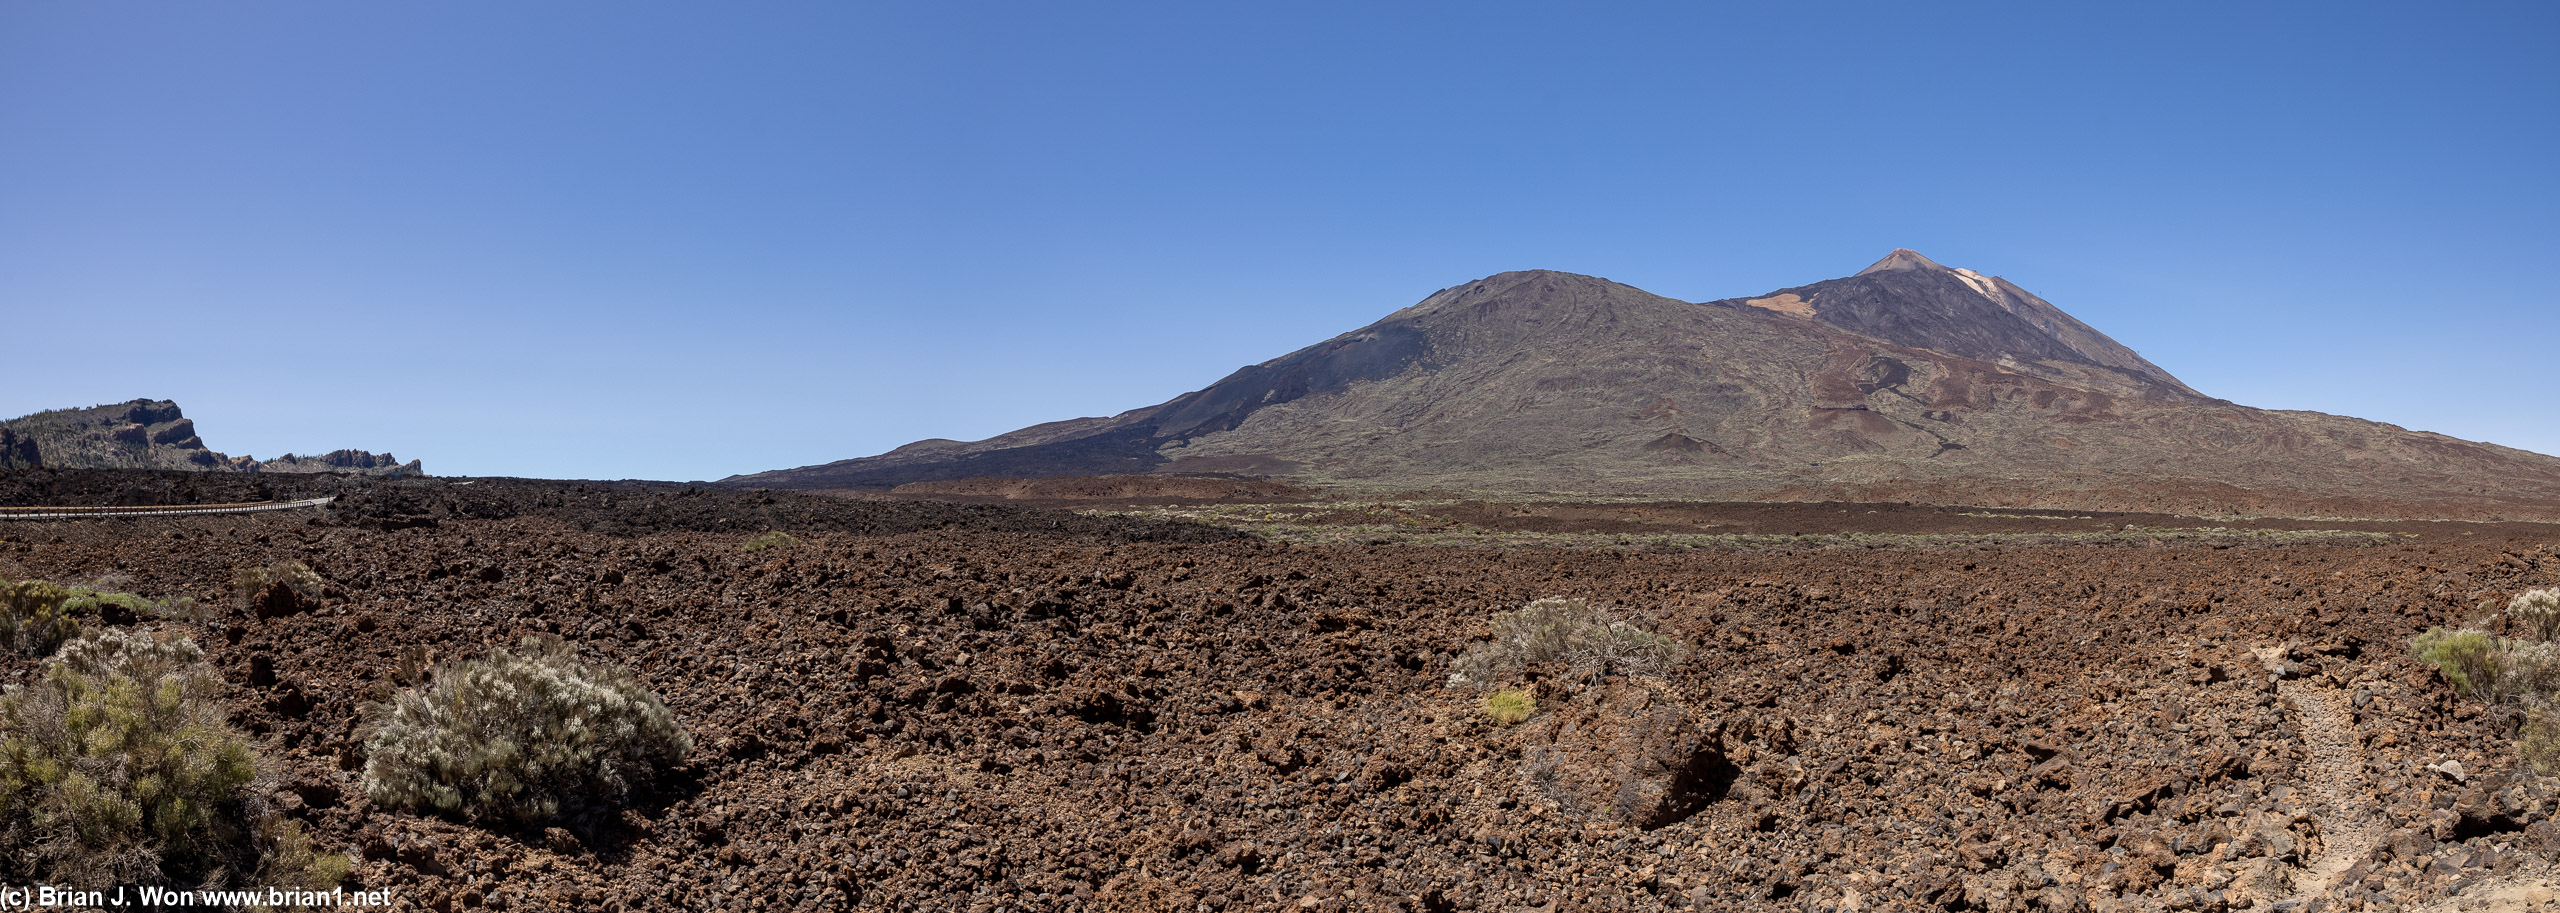 Nearly barren volcanic landscapes.